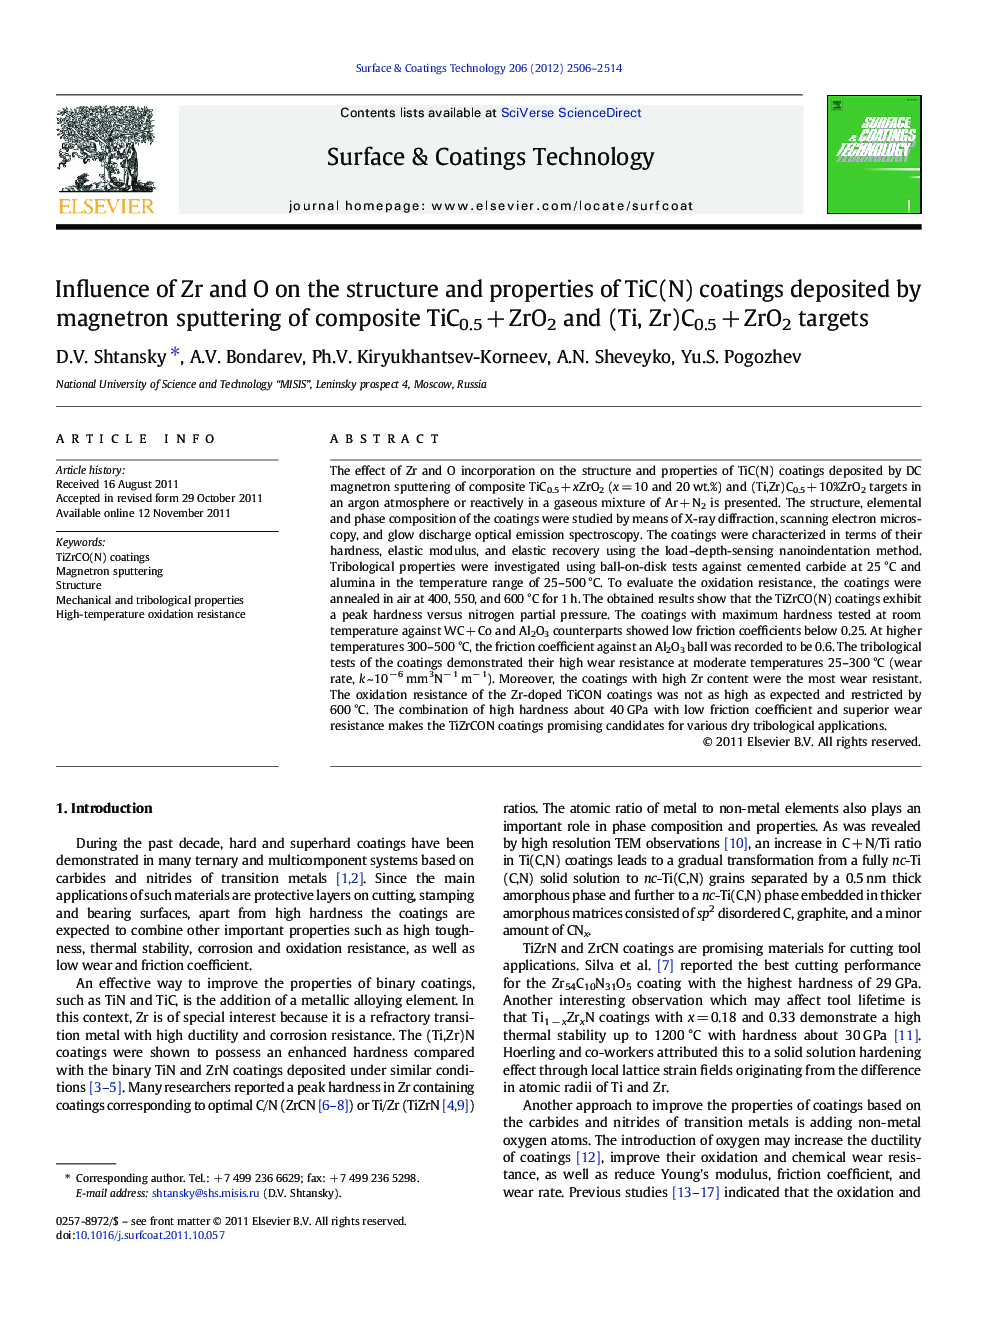 Influence of Zr and O on the structure and properties of TiC(N) coatings deposited by magnetron sputtering of composite TiC0.5Â +Â ZrO2 and (Ti, Zr)C0.5Â +Â ZrO2 targets